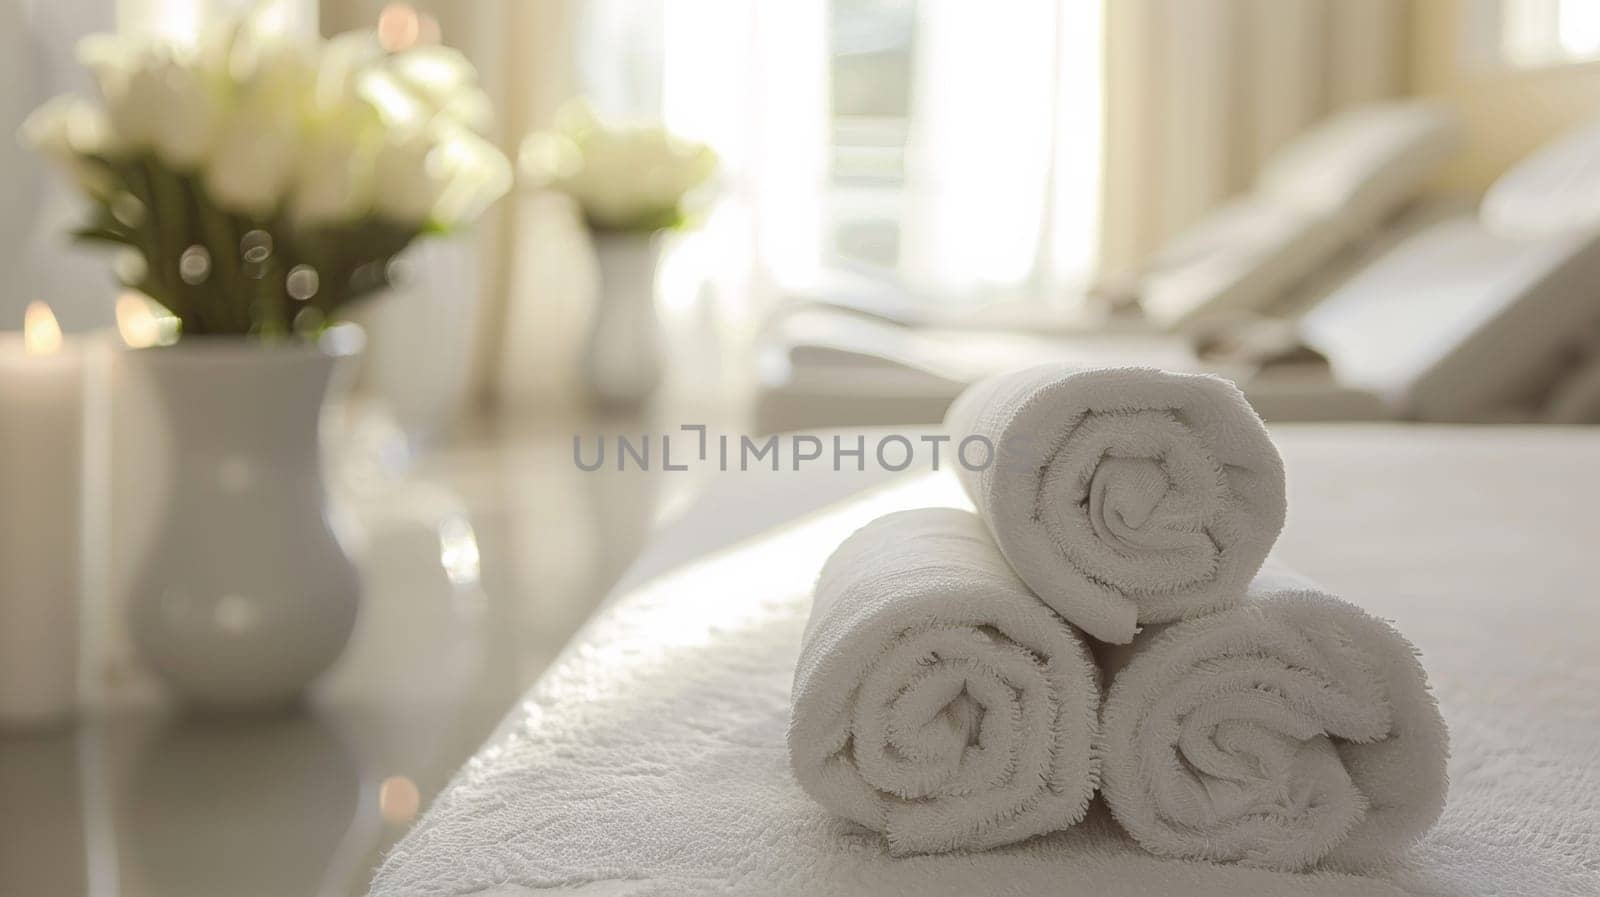 A close up of three folded towels on a bed in front of vases, AI by starush